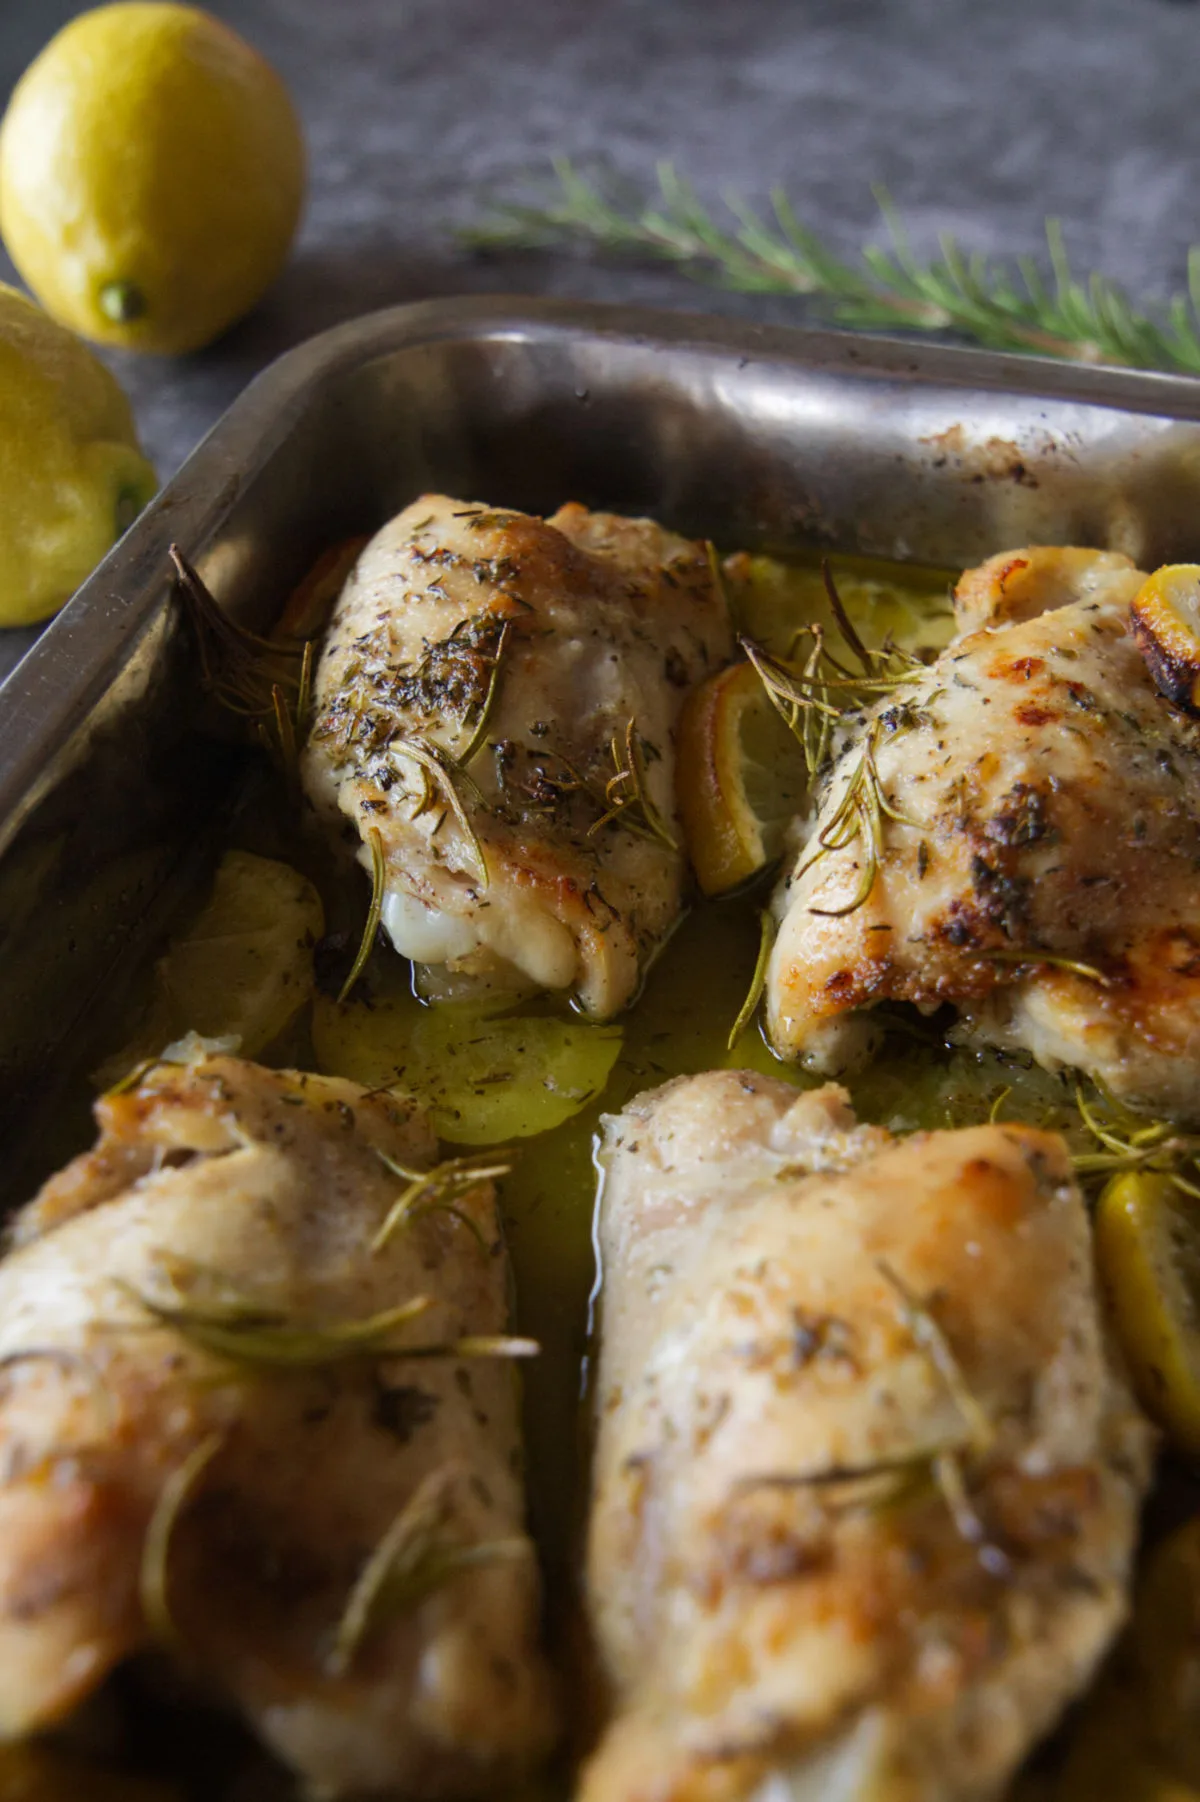 A baking tray of lemon and herb chicken thighs.